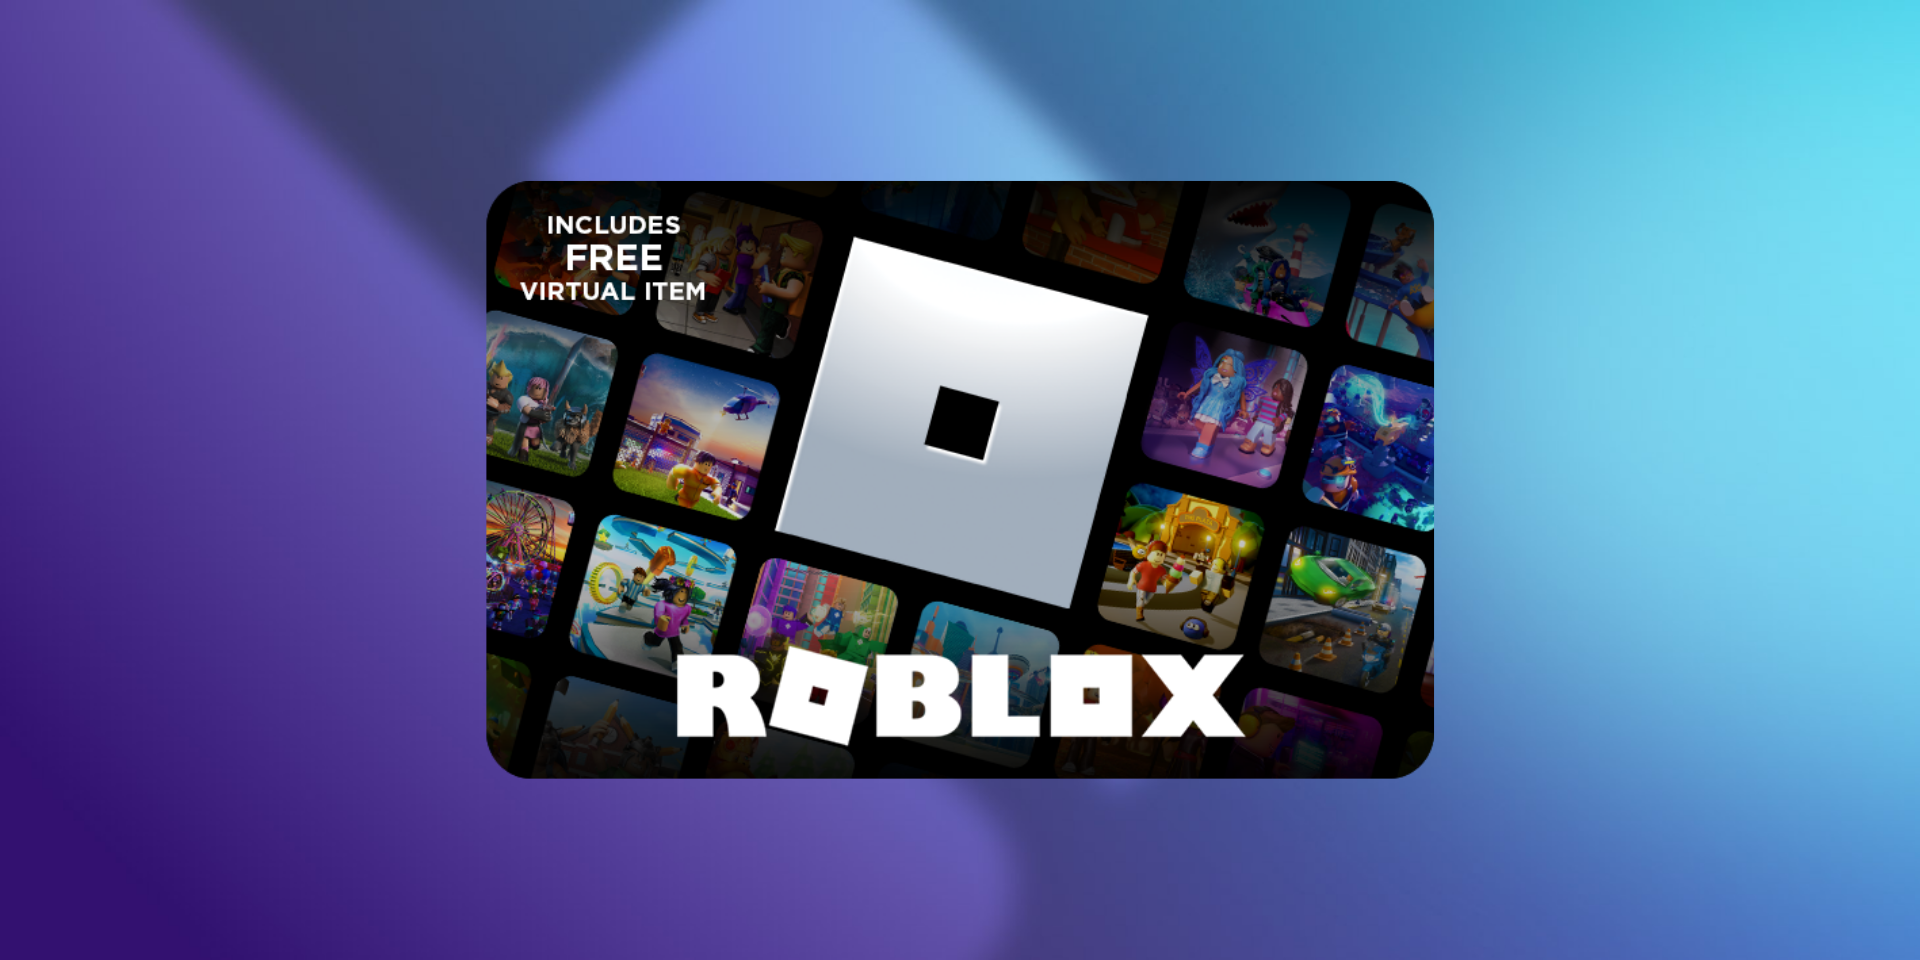 What Is Code 1001 in Roblox?